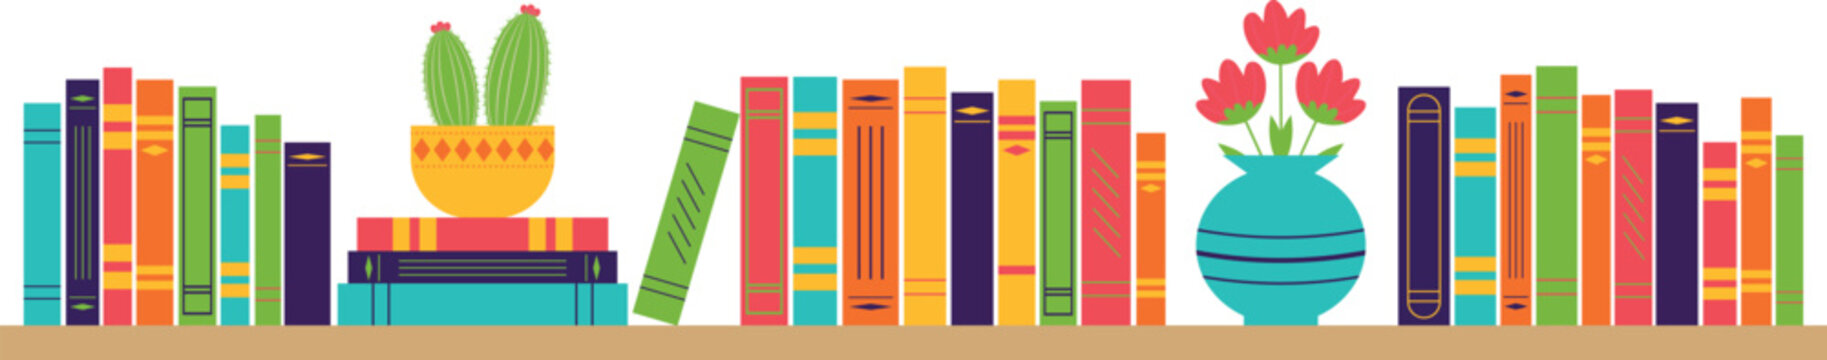 Bookshelf with books and flowers on a transparent background. Vector banner for library, bookstore.